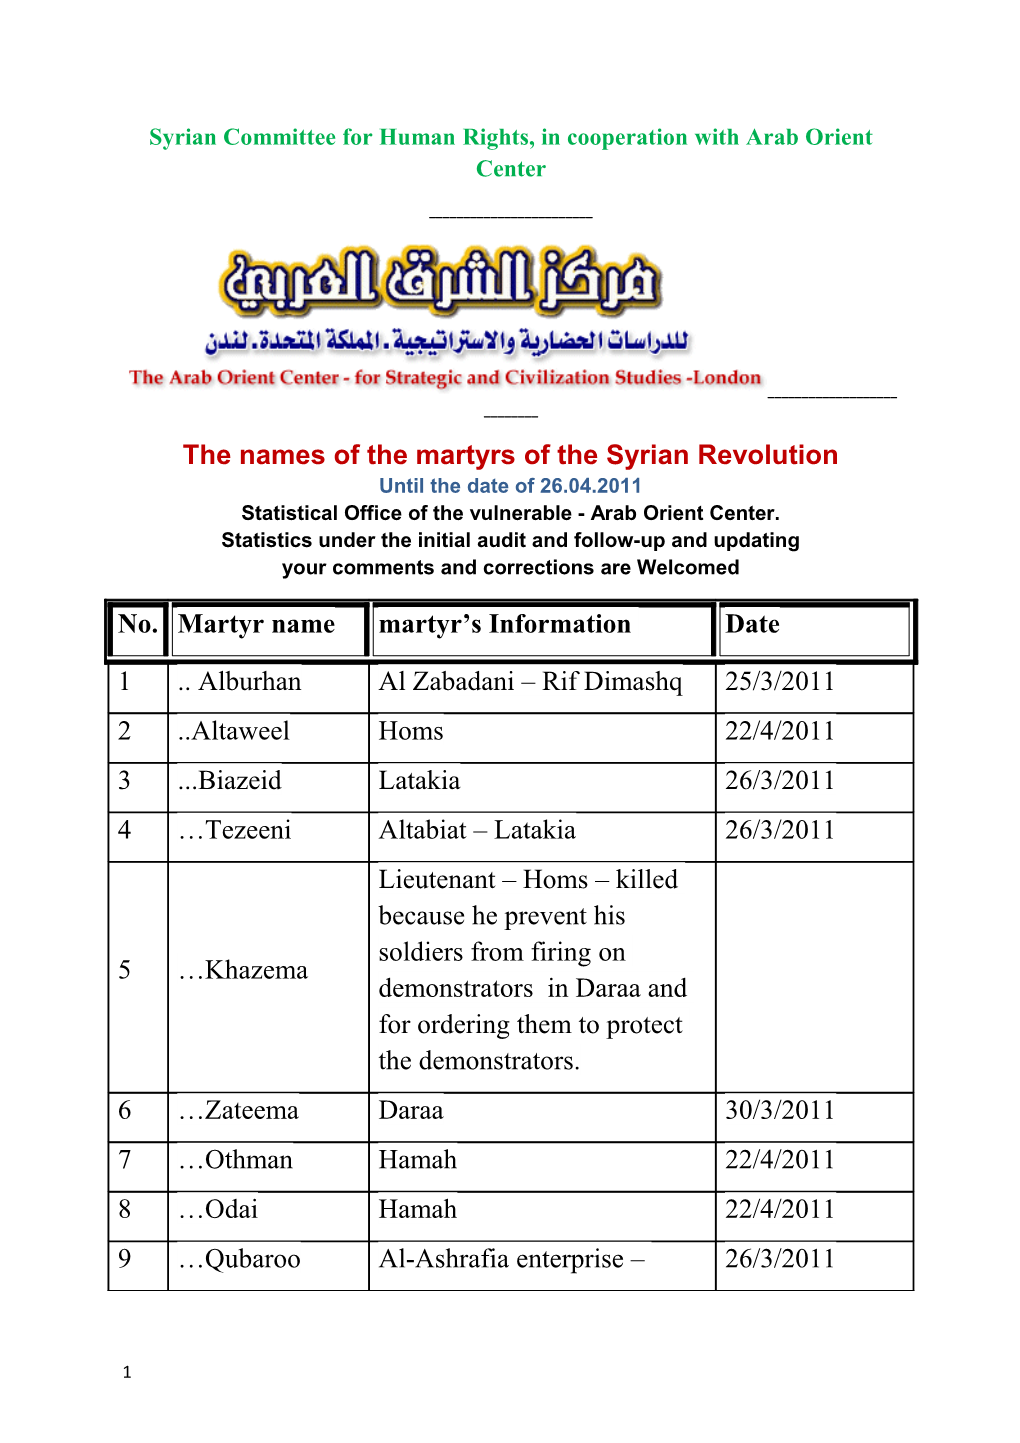 Syrian Committee for Human Rights, in Cooperation with Arab Orient Center